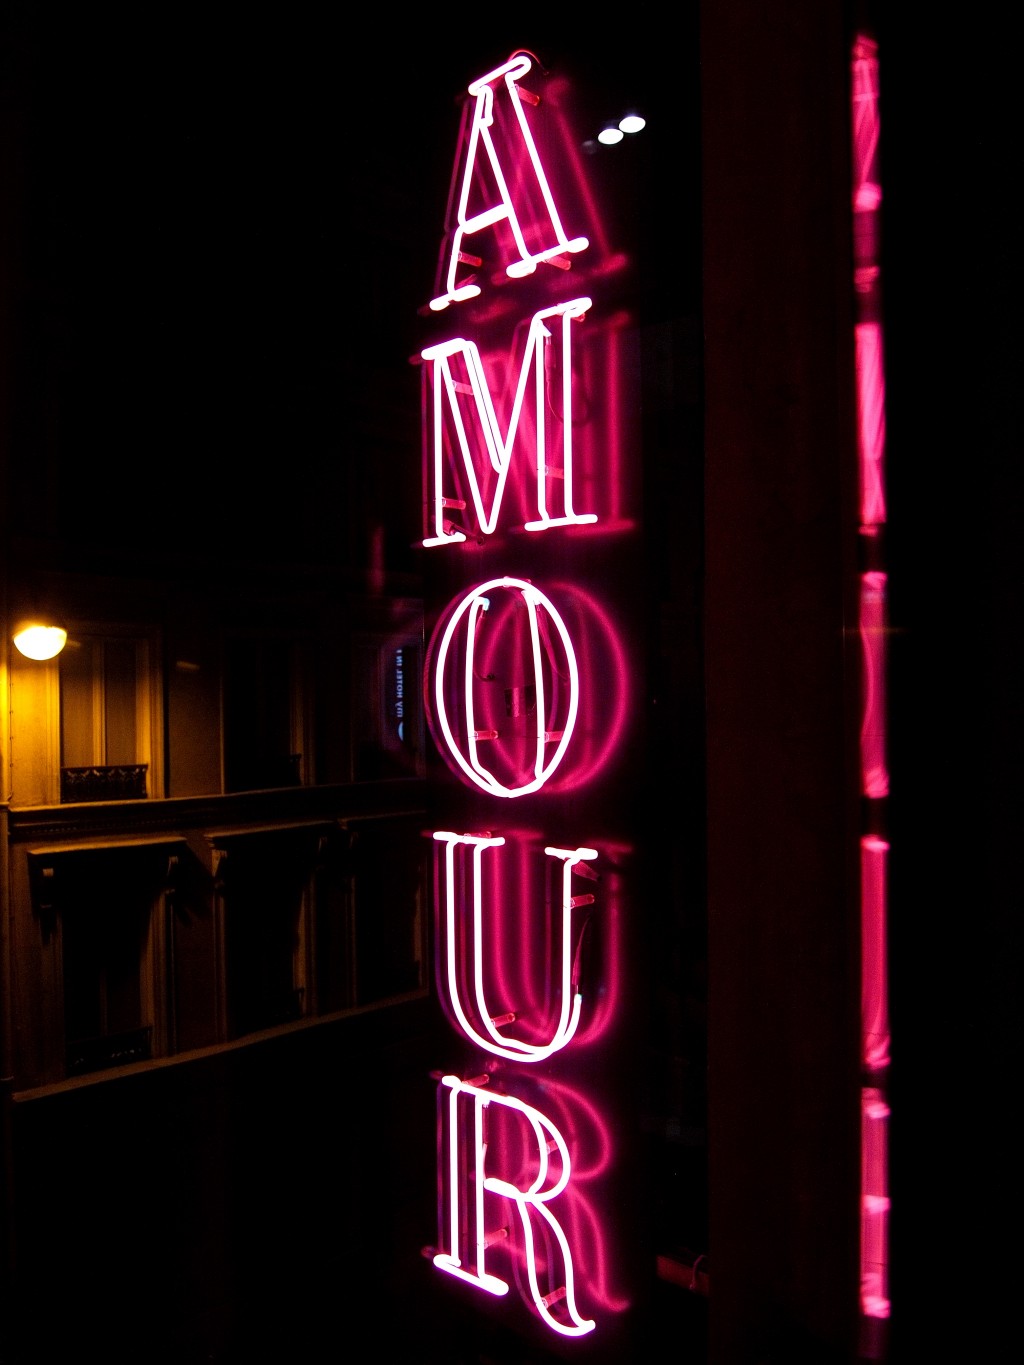 Top Tip: Hotel Amour, 8 rue Navarin A former brothel that has been transformed into a boutique hotel in the shabby-chic neighbourhood known as 'SoPi'. Each of the 20 rooms are unique and decorated around the theme of eroticism. The late-night brasserie is fantastic for people watching and, in the day, the large terrace and conservatory provide tranquil respite from the streets of Paris.